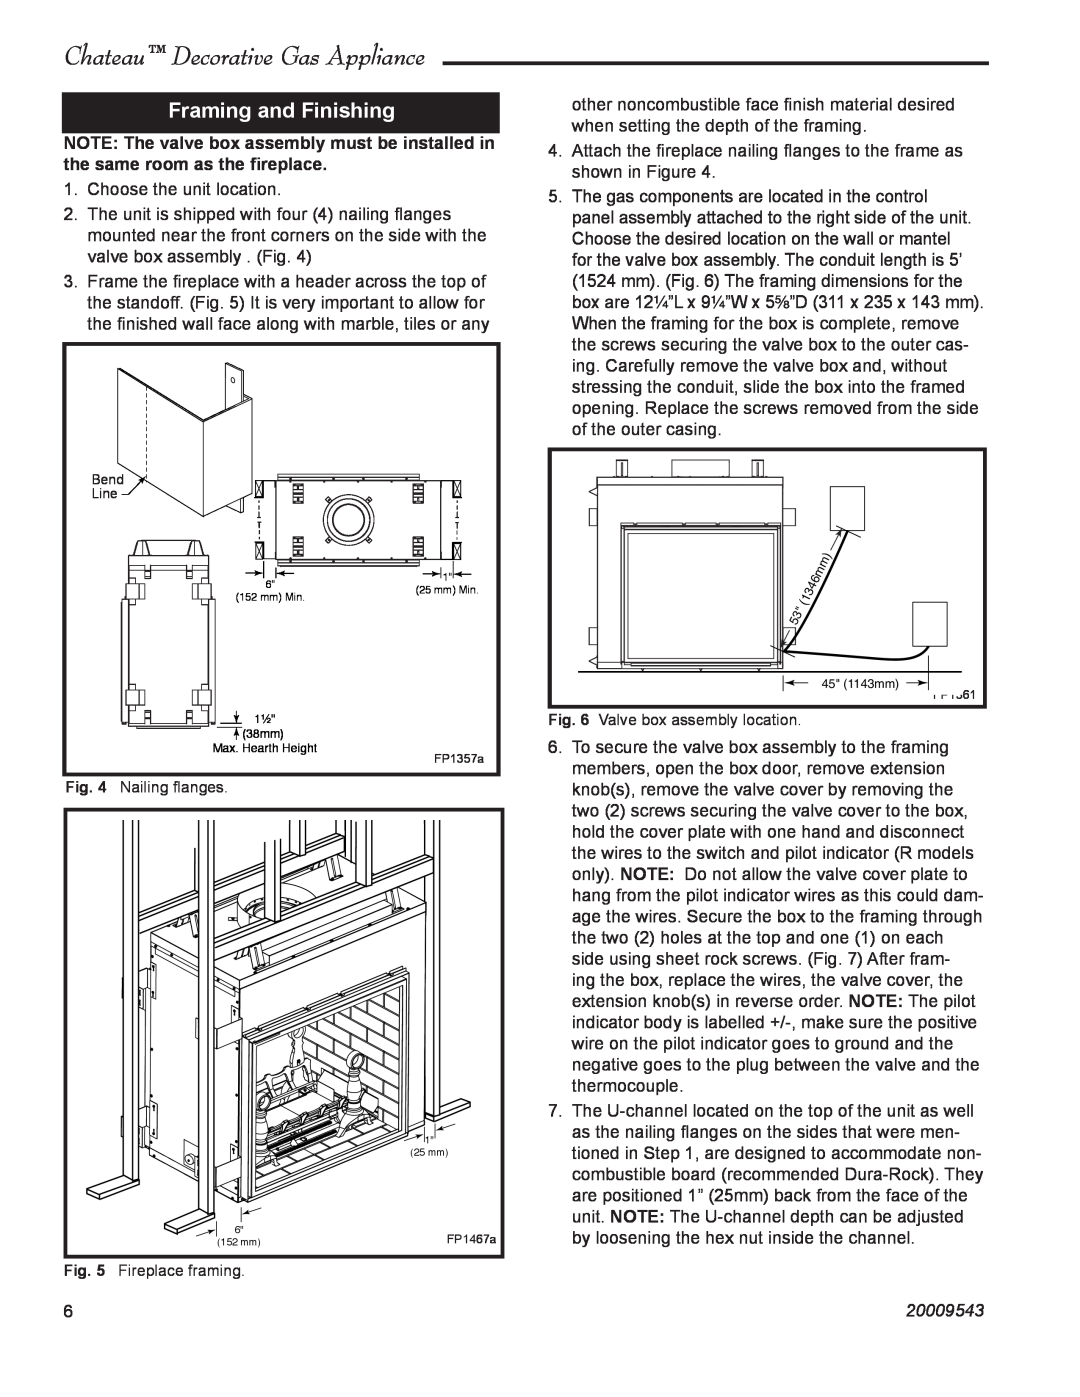 Vermont Casting DVT38S2 installation instructions Framing and Finishing, Chateau Decorative Gas Appliance, 20009543 